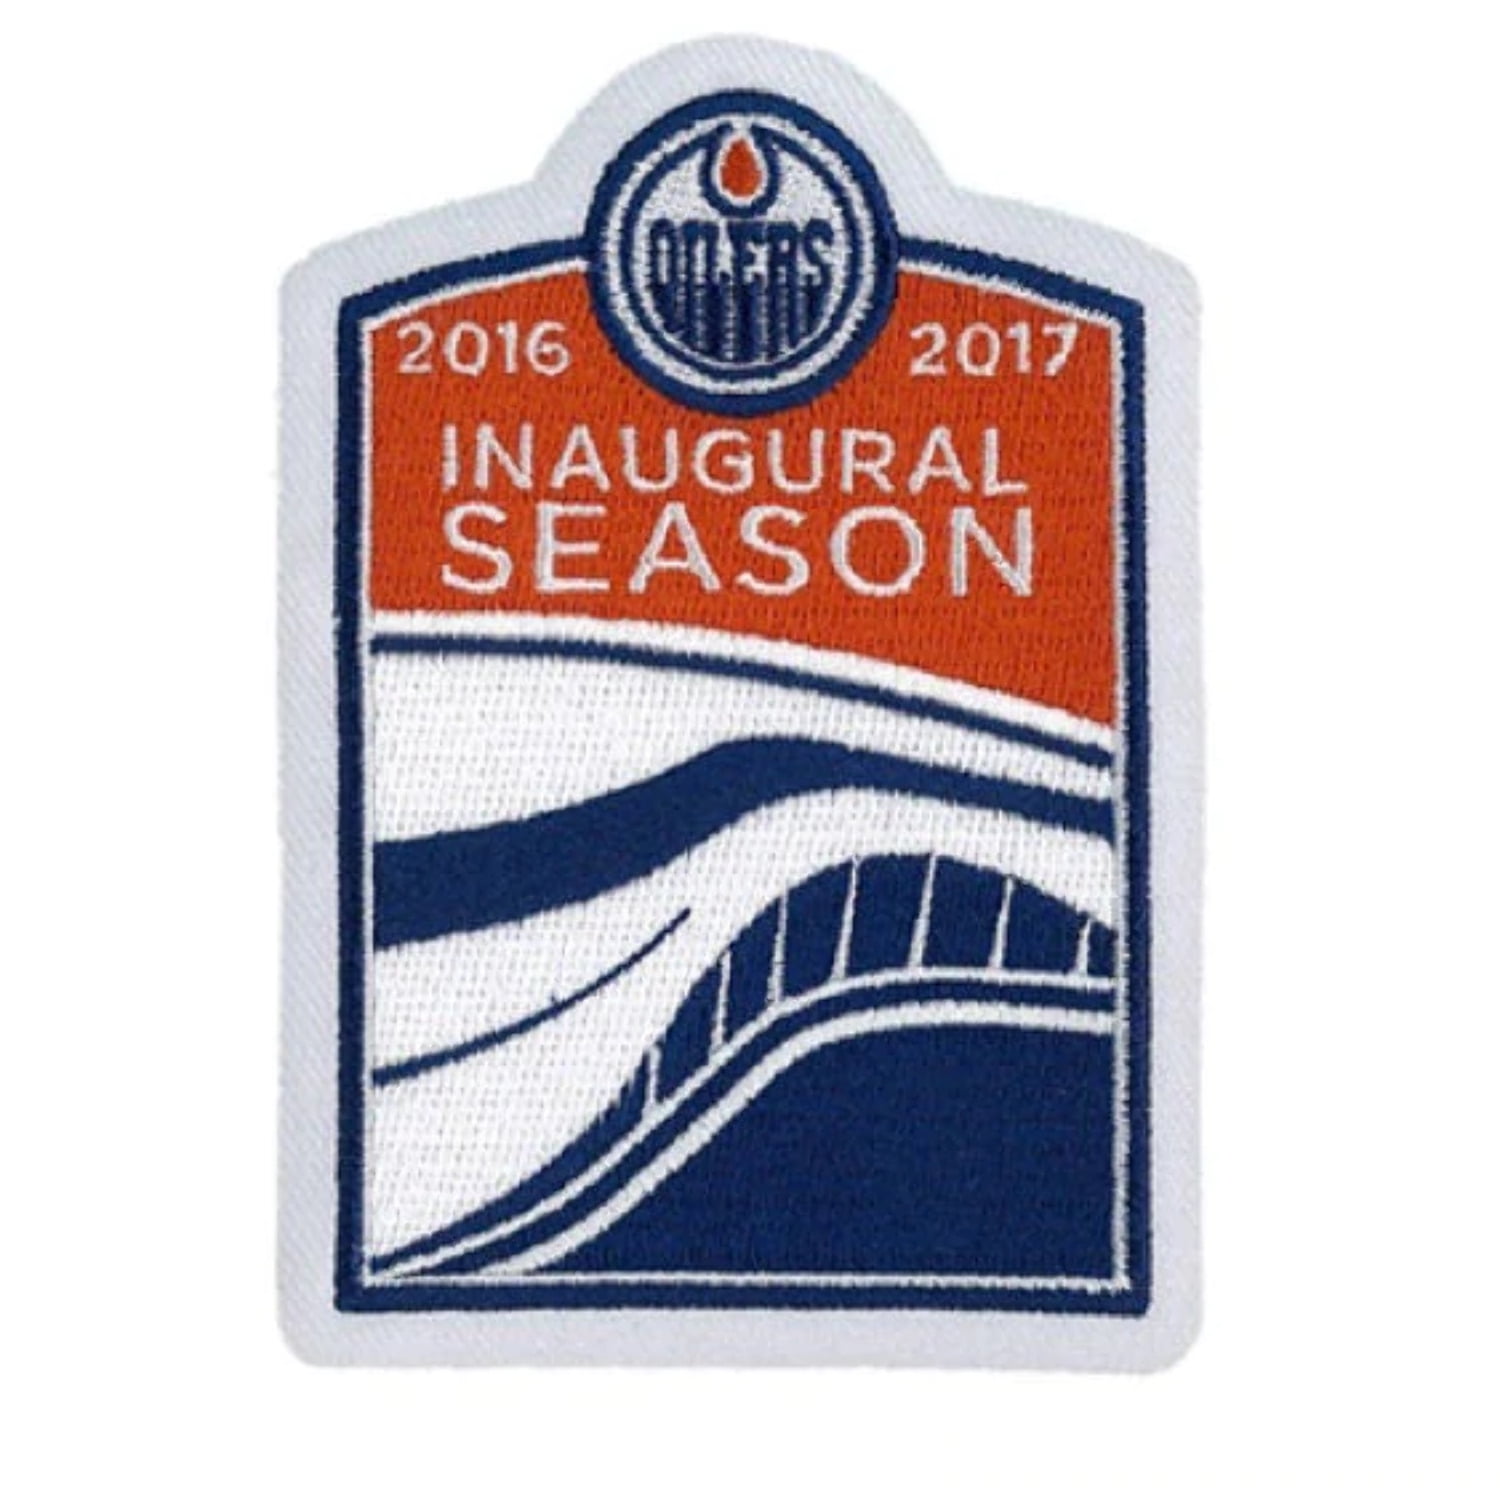 Edmonton Oilers Inaugural Season Jersey Patch at Rogers Place 2016